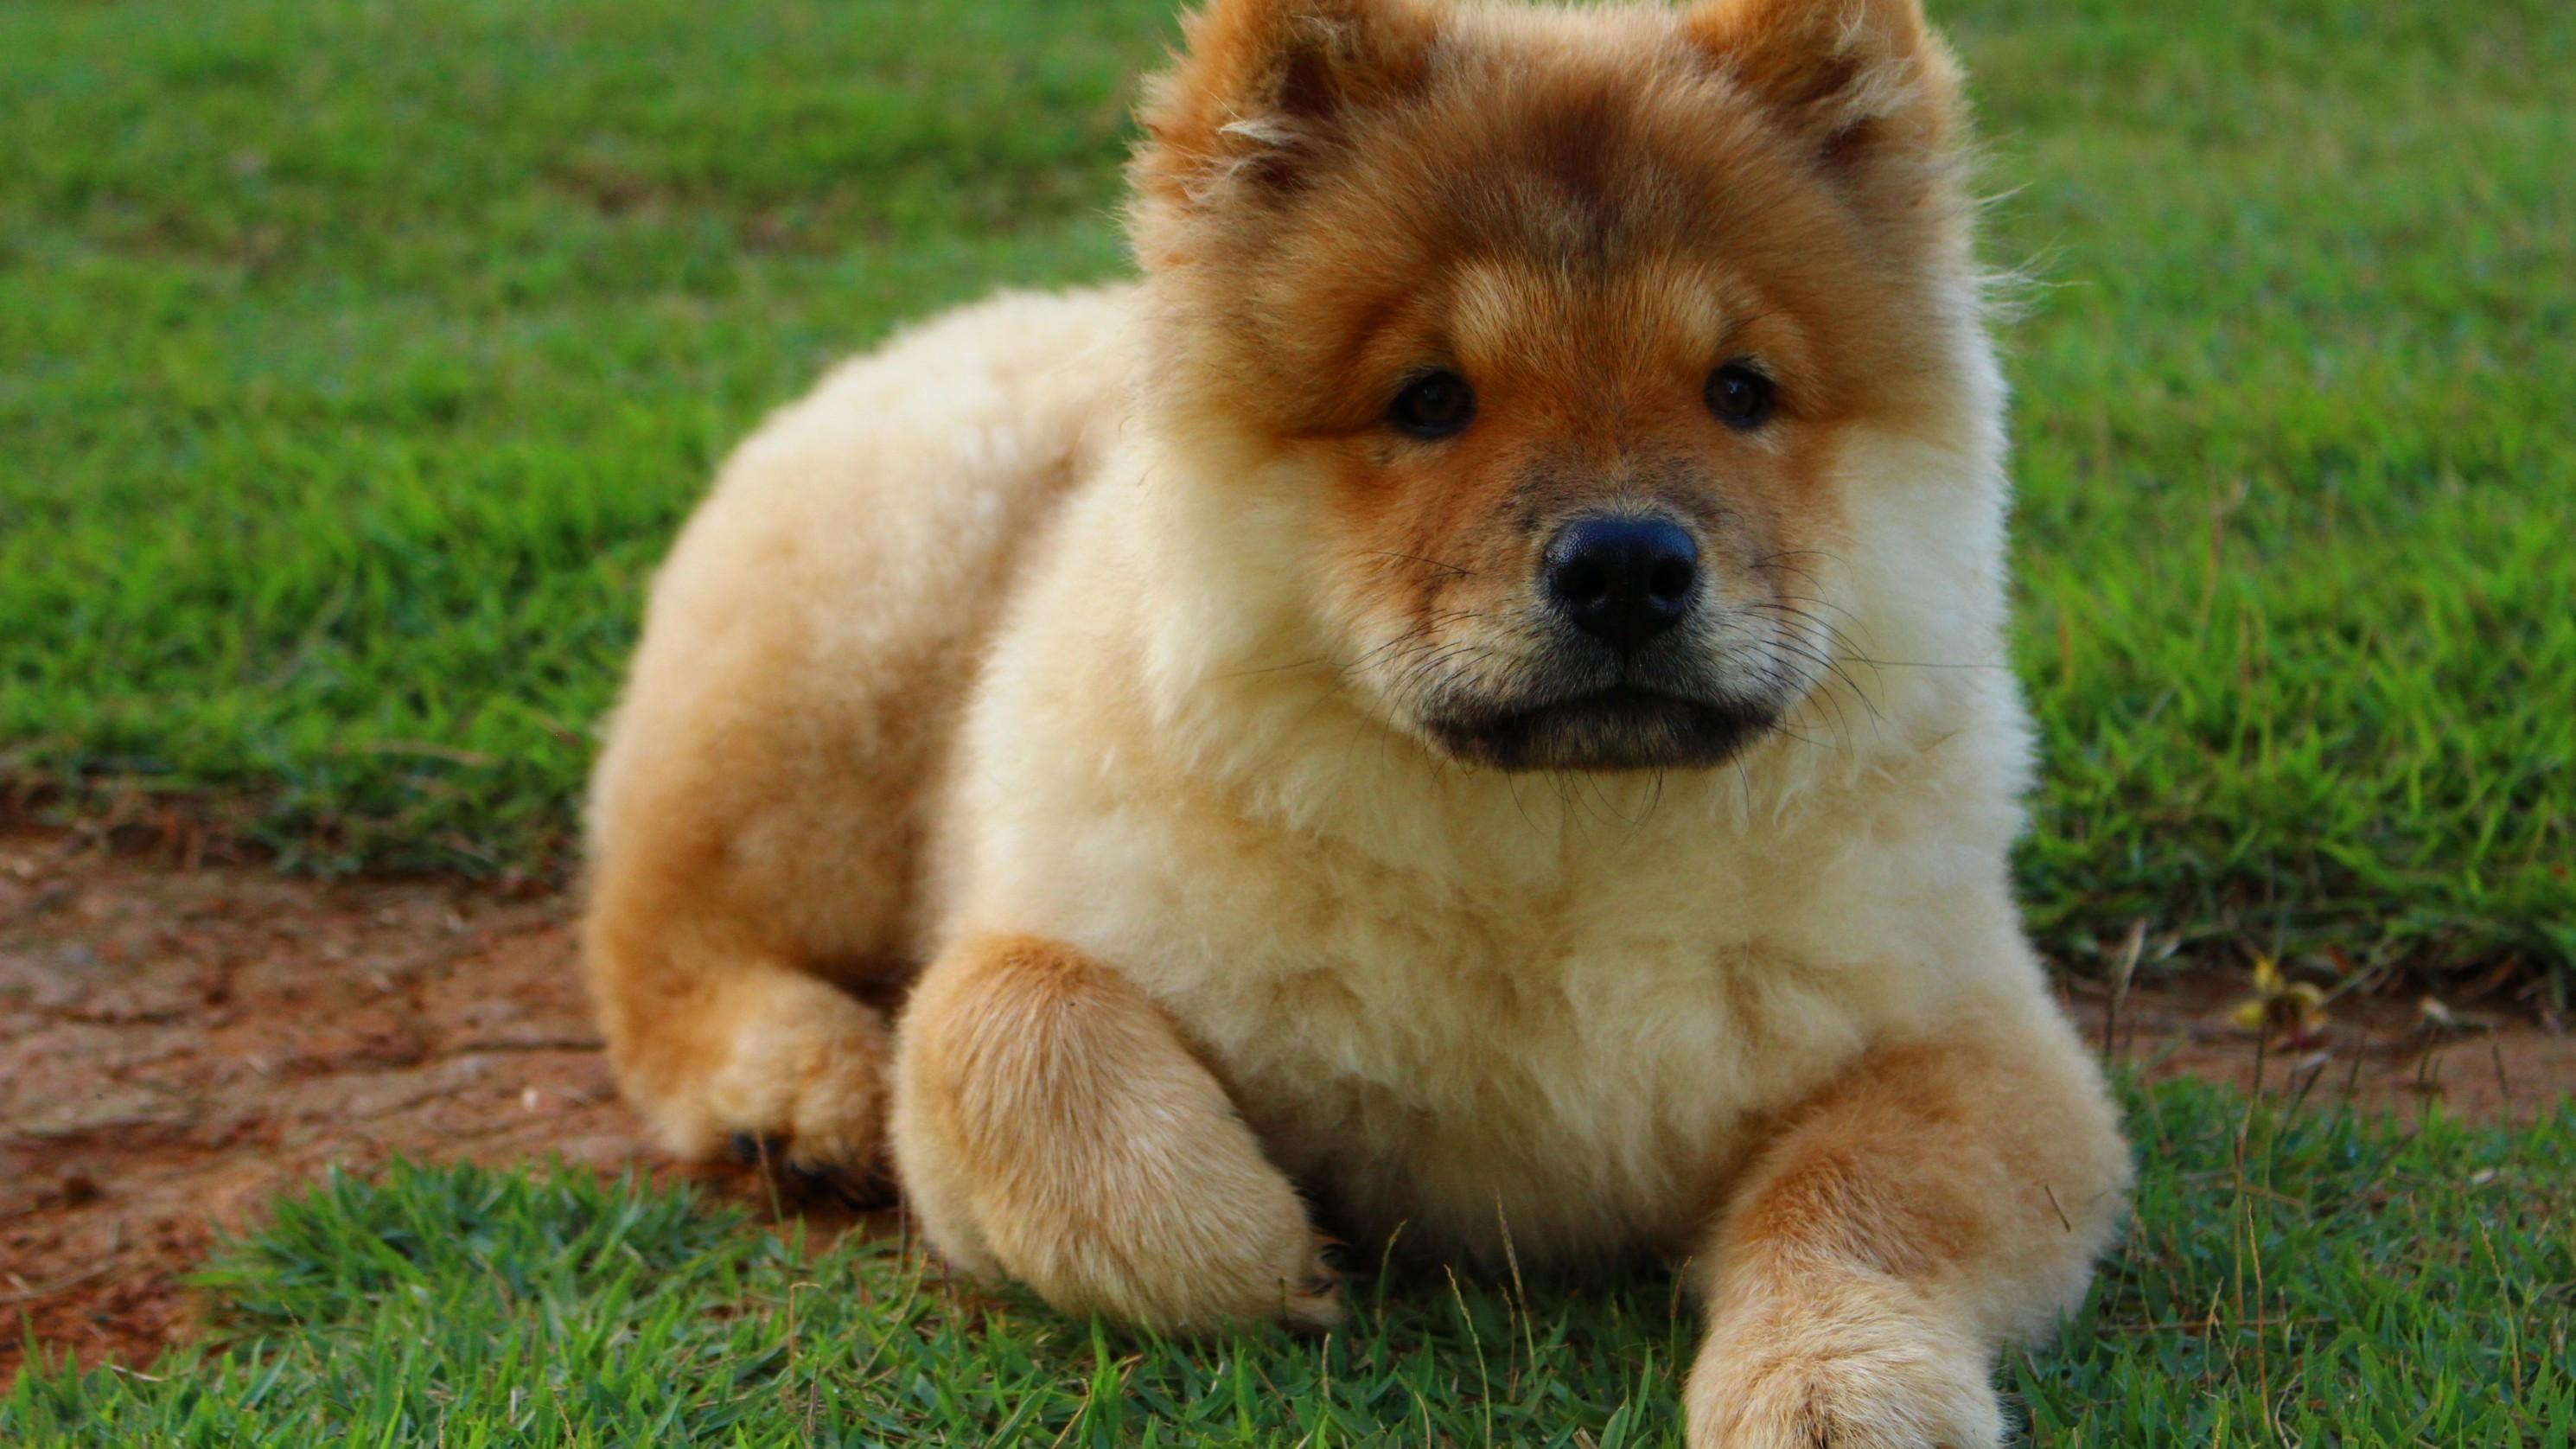 Download 2980x1676 Puppy, Sitting, Grass, Chow Chow, Fluffy, Dogs